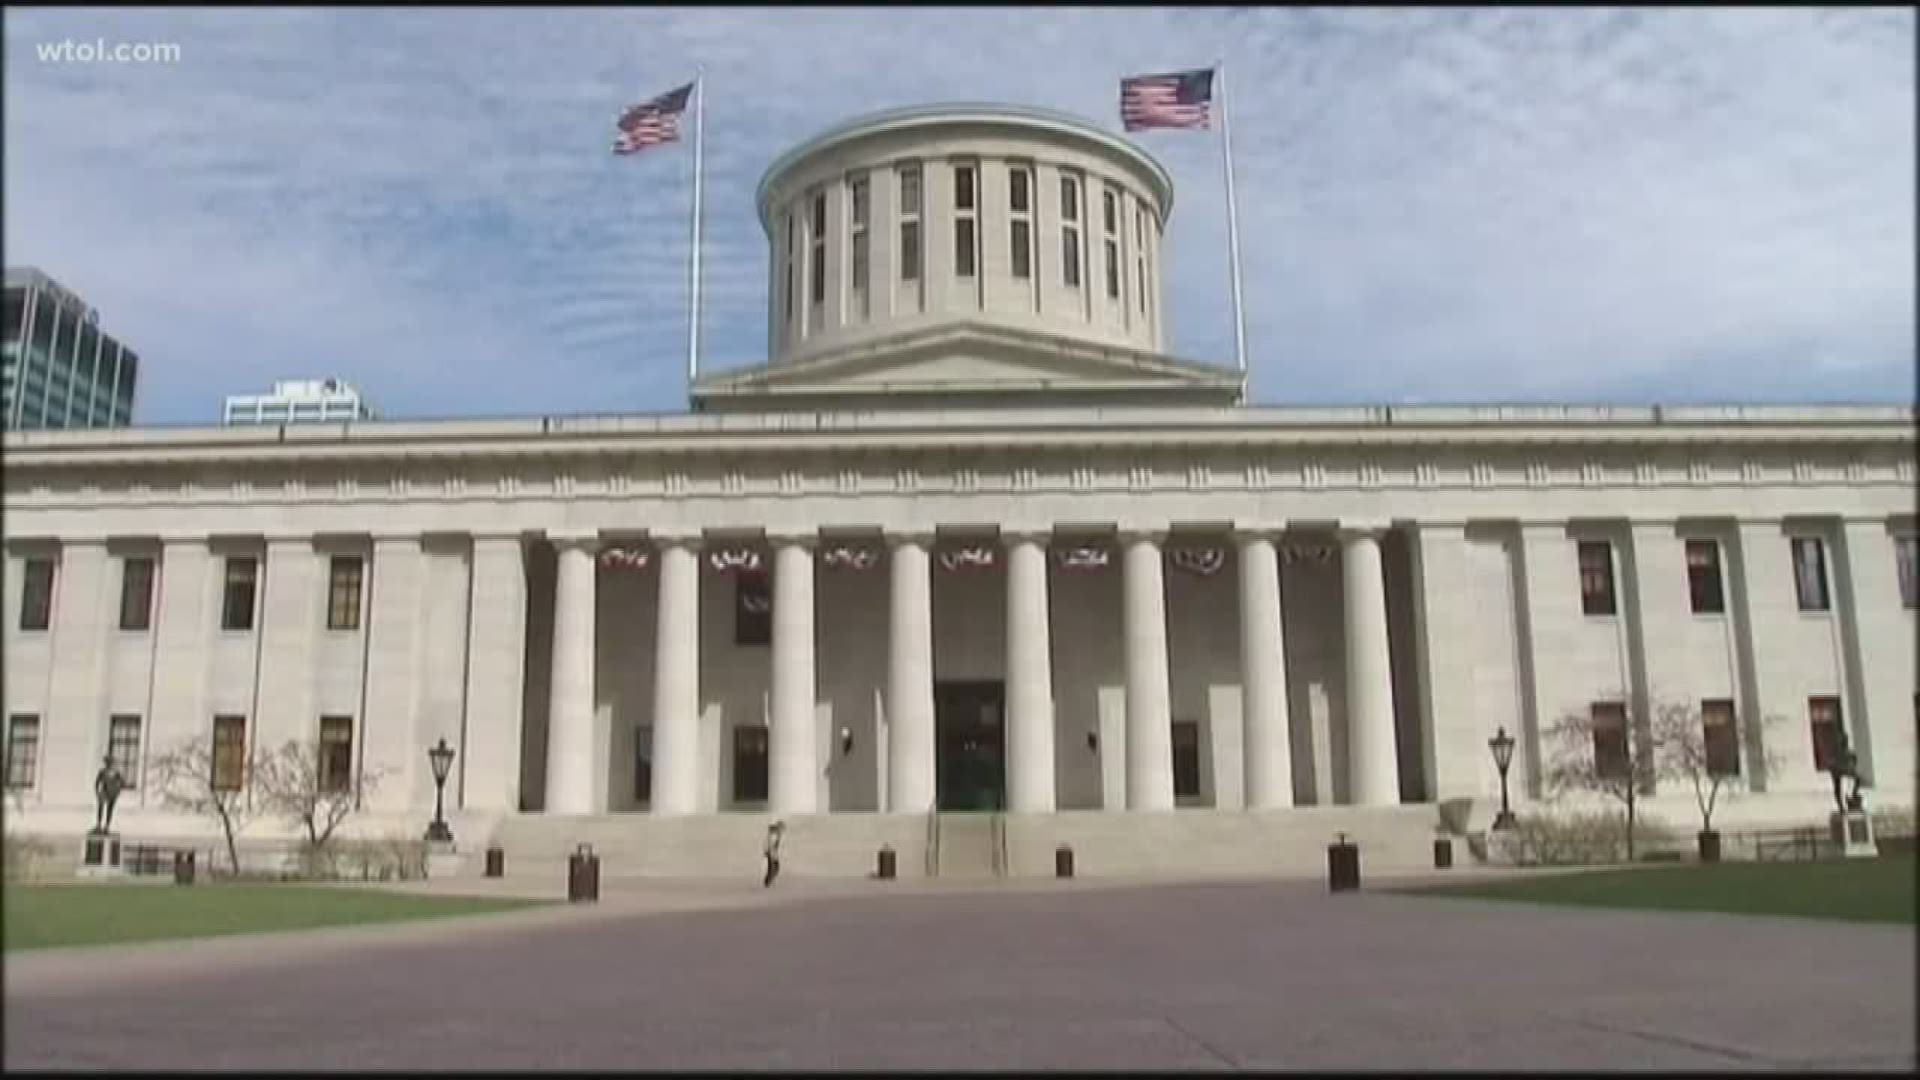 Ohio tax filing deadline now May 17, matches IRS deadline